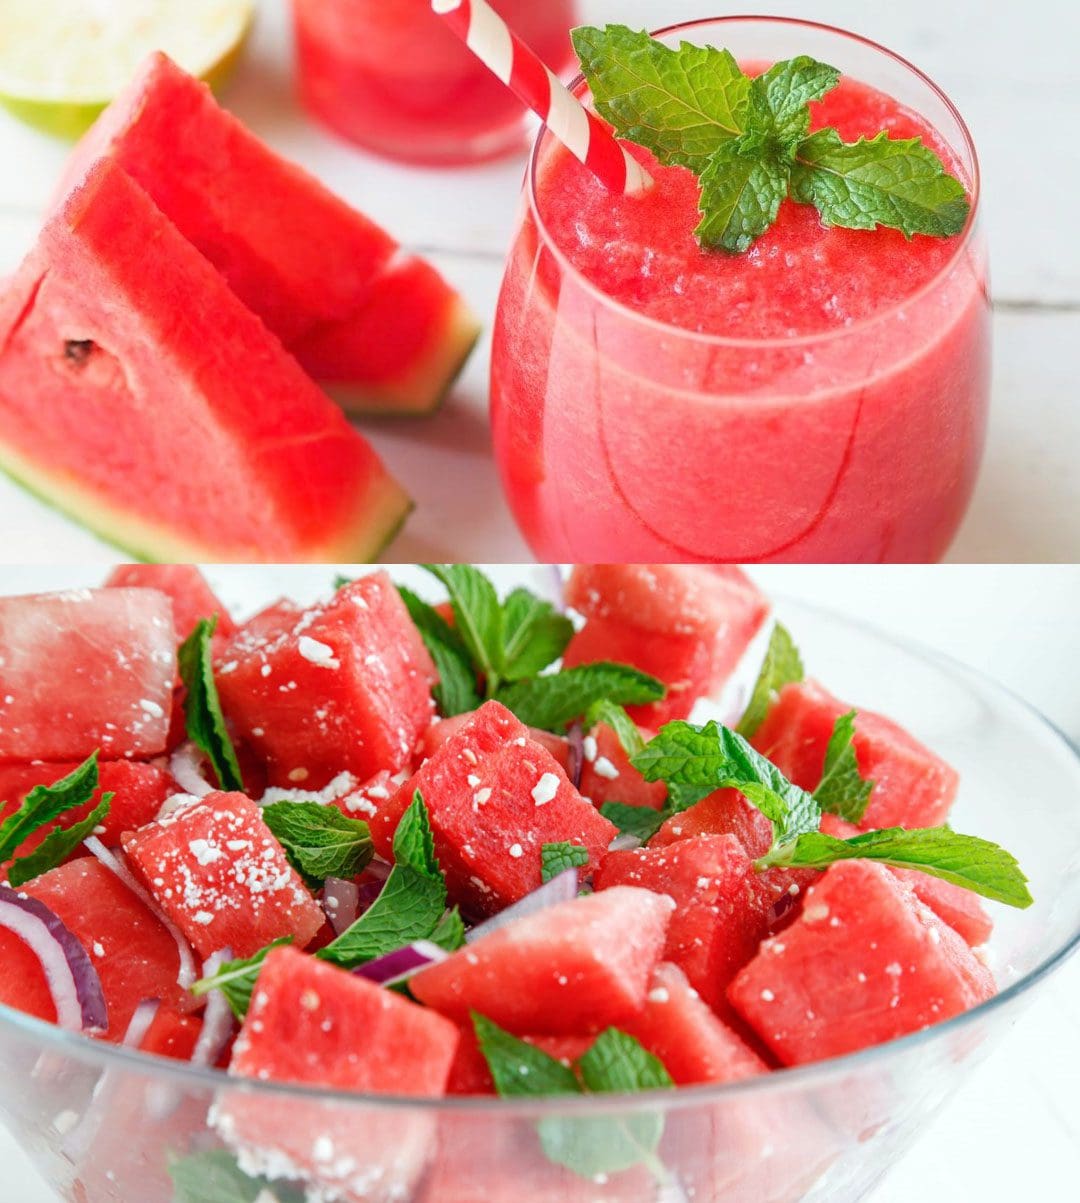 Watermelon Nutrition: EP's Chiropractic Functional Clinic